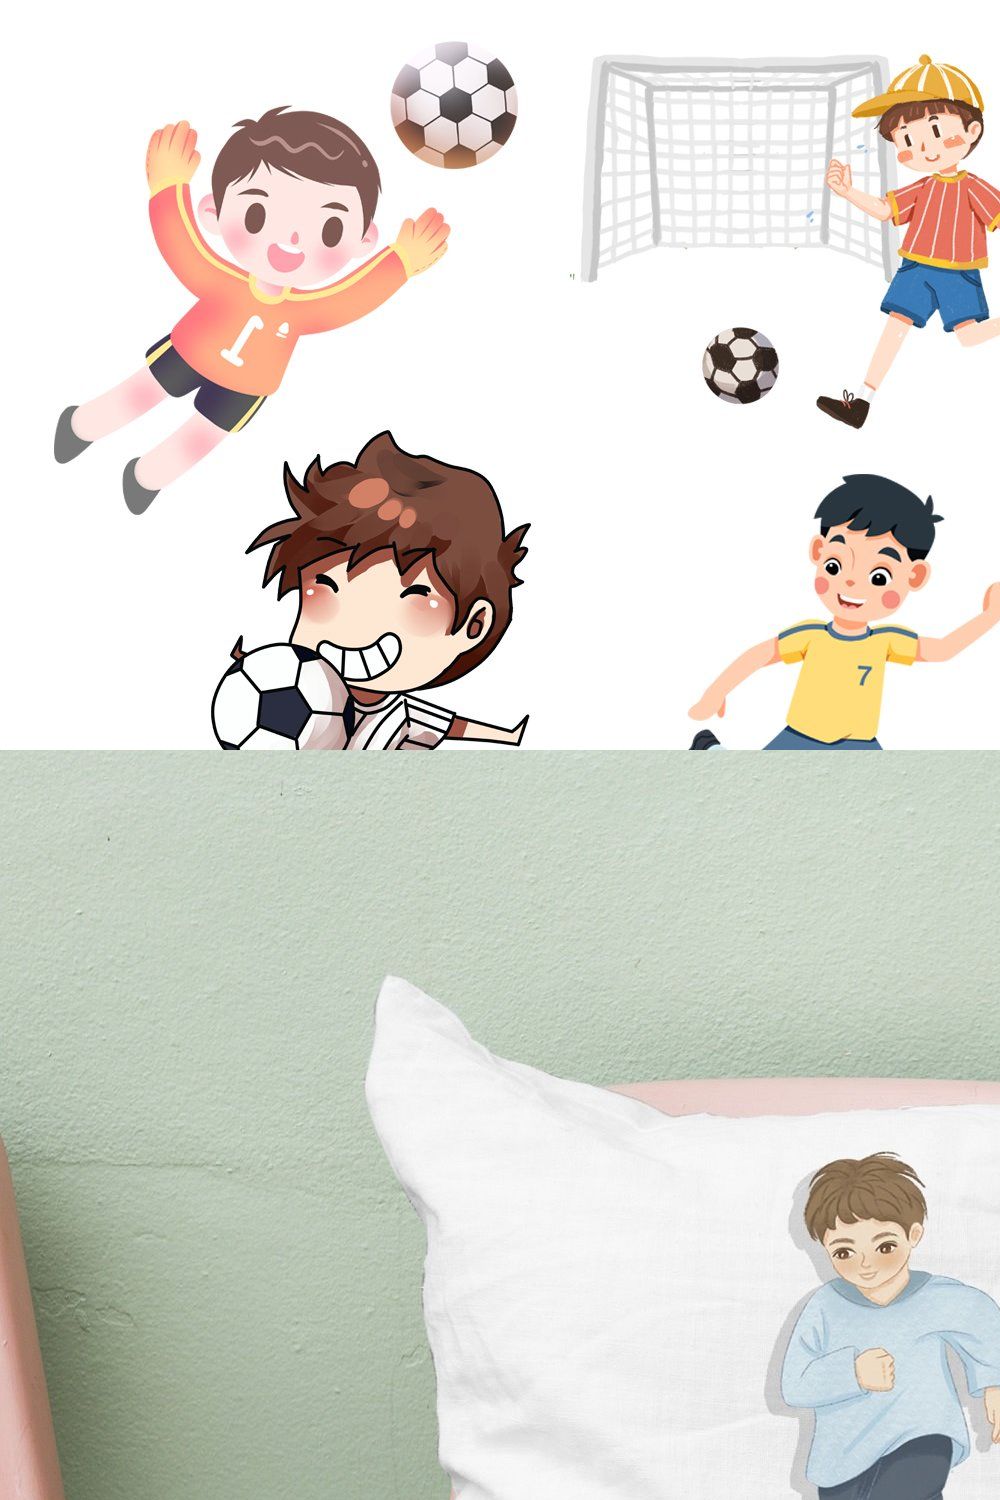 Kids playing football Clipart pinterest preview image.